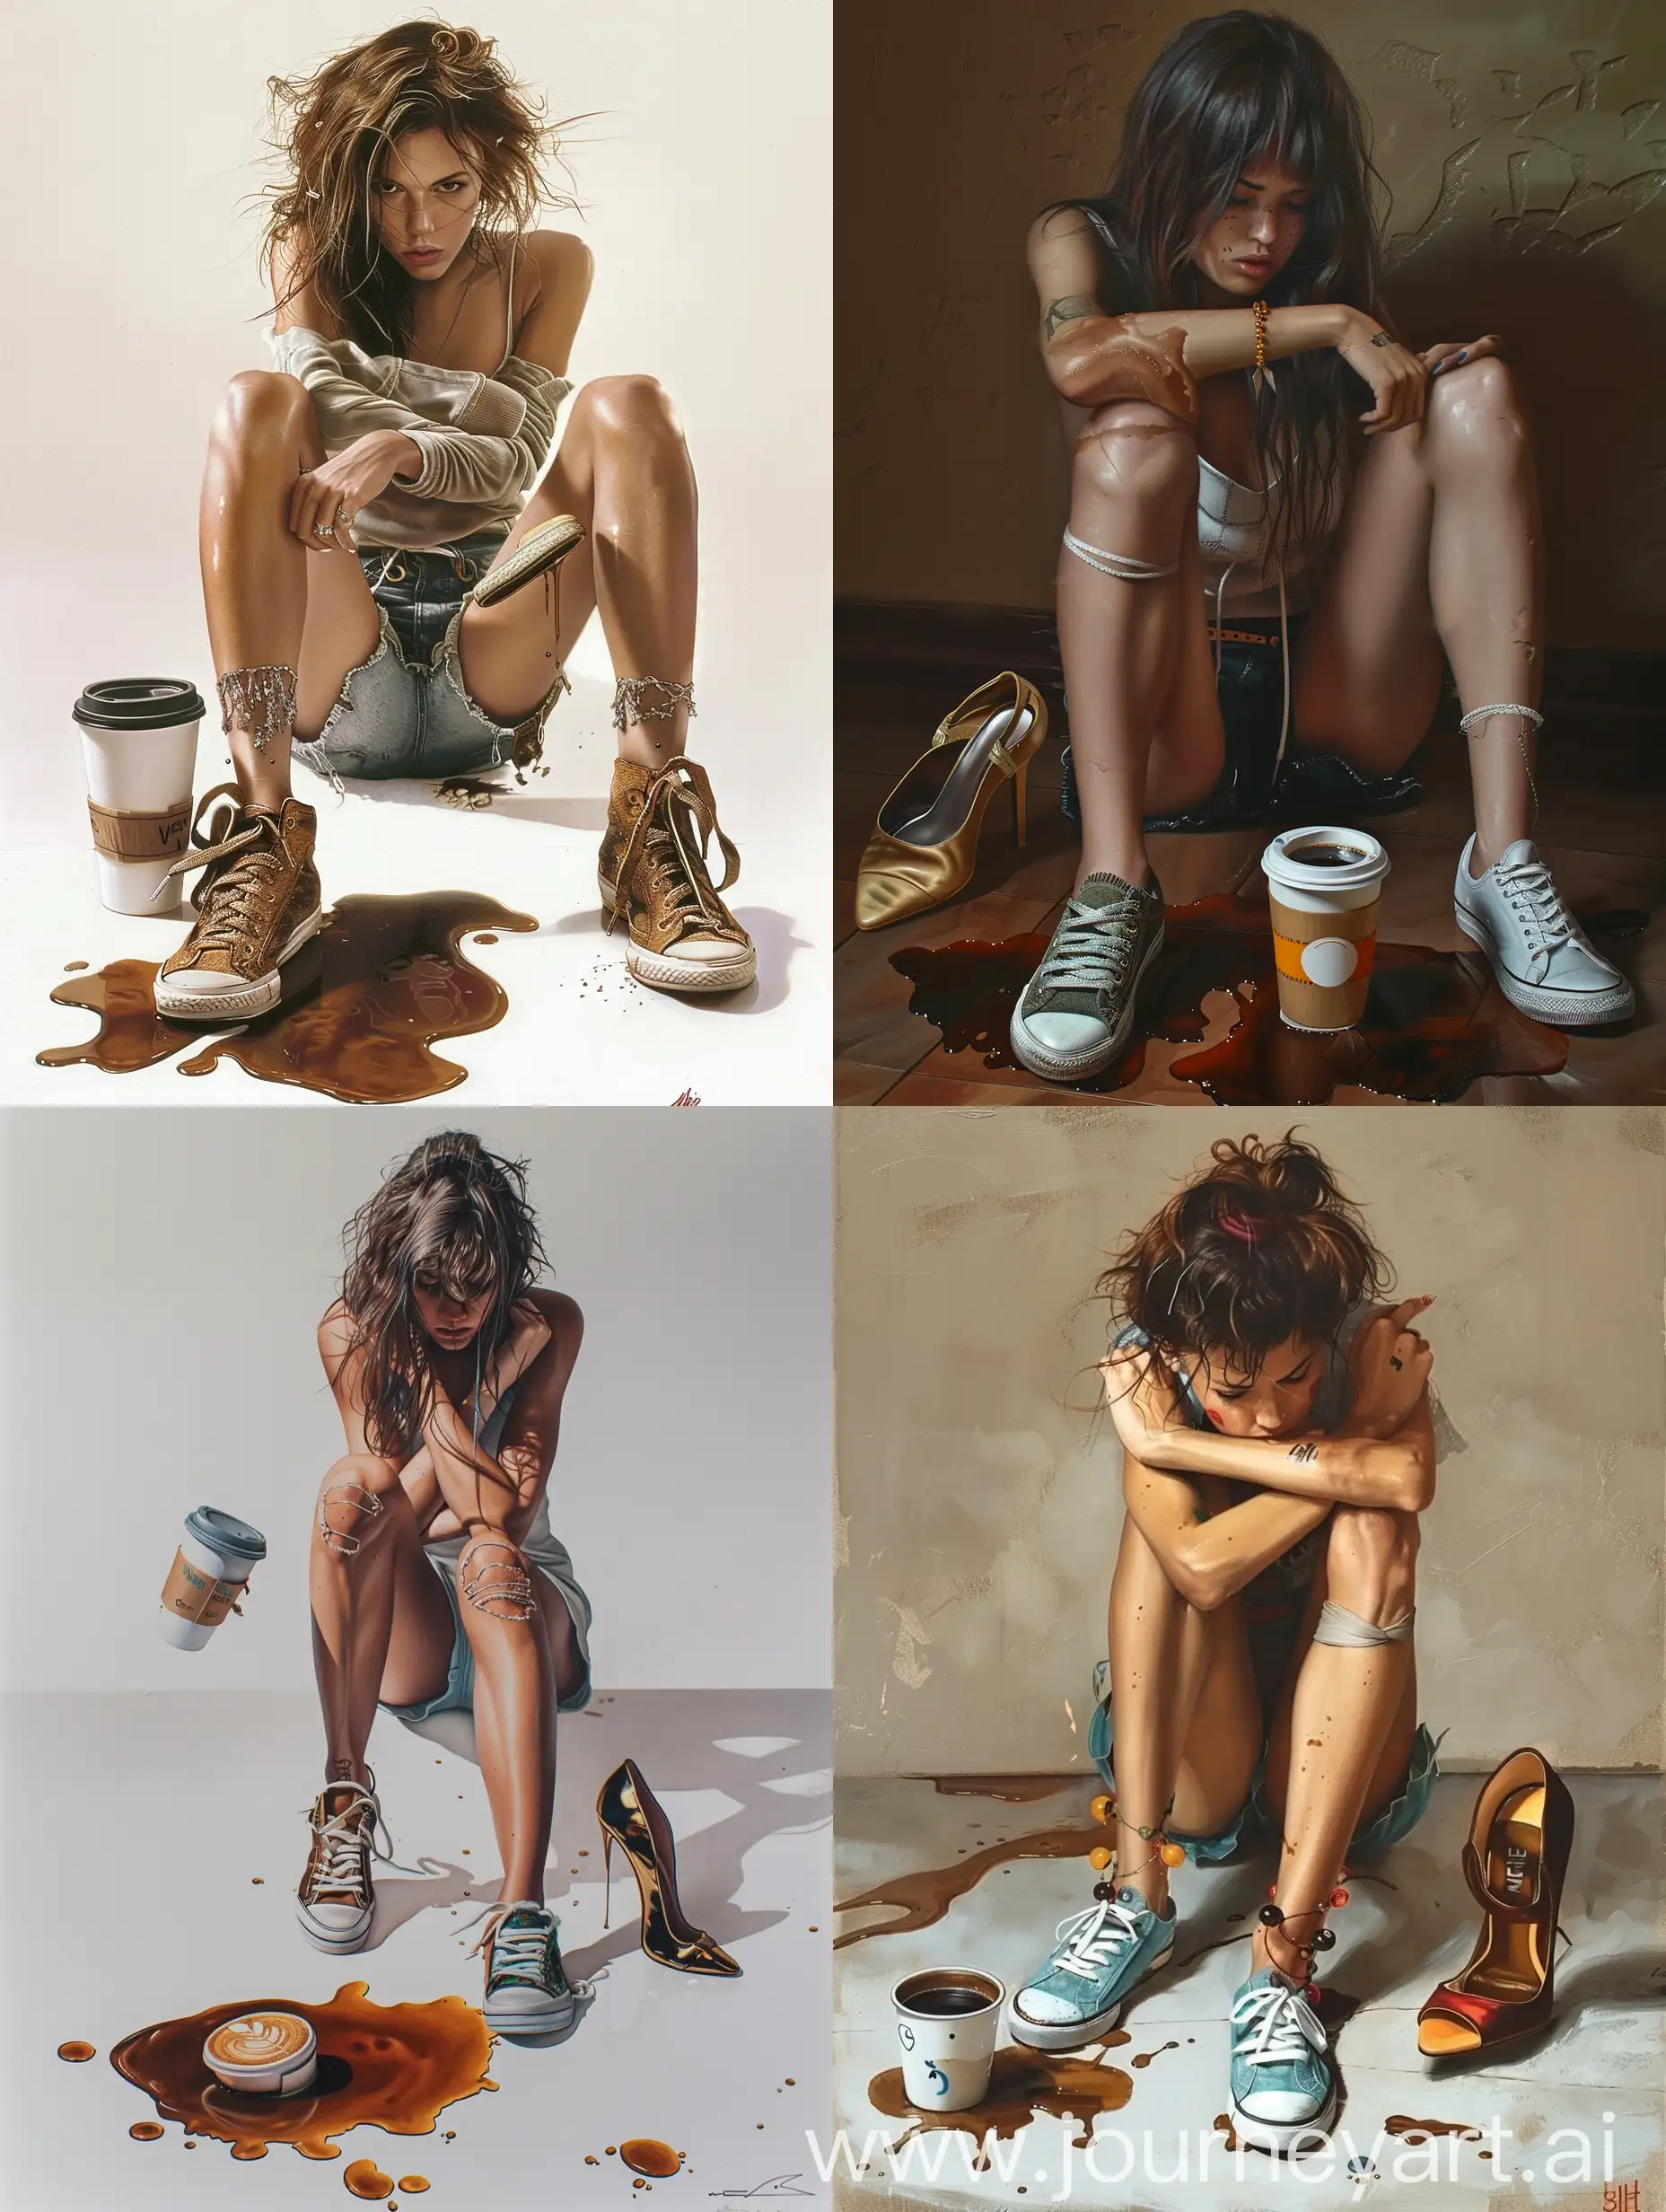 Disheveled-Woman-with-Mismatched-Shoes-and-Spilled-Coffee-Cup